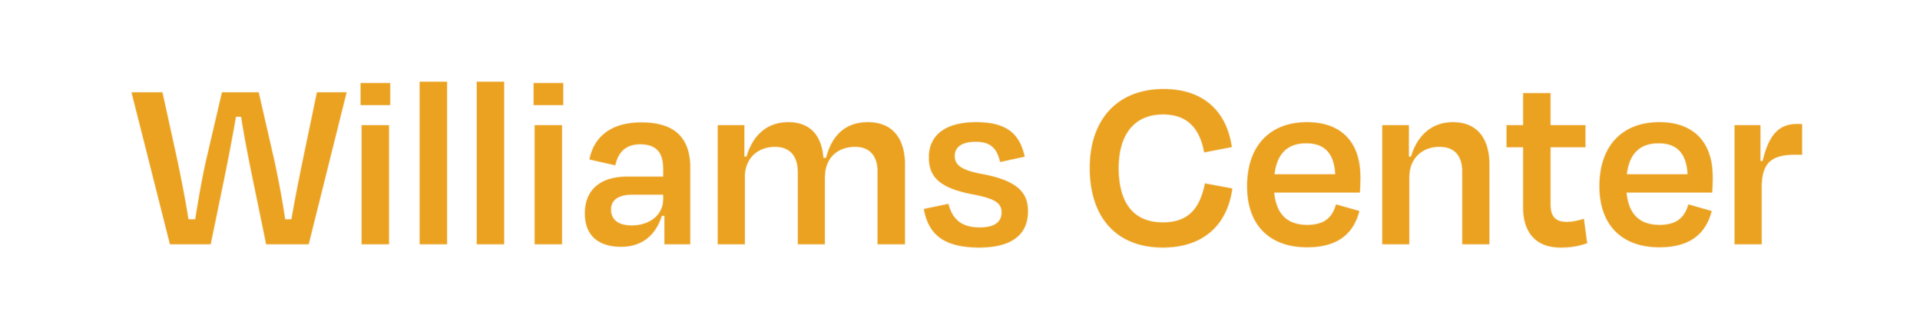 Williams center logo in yellow color on white background